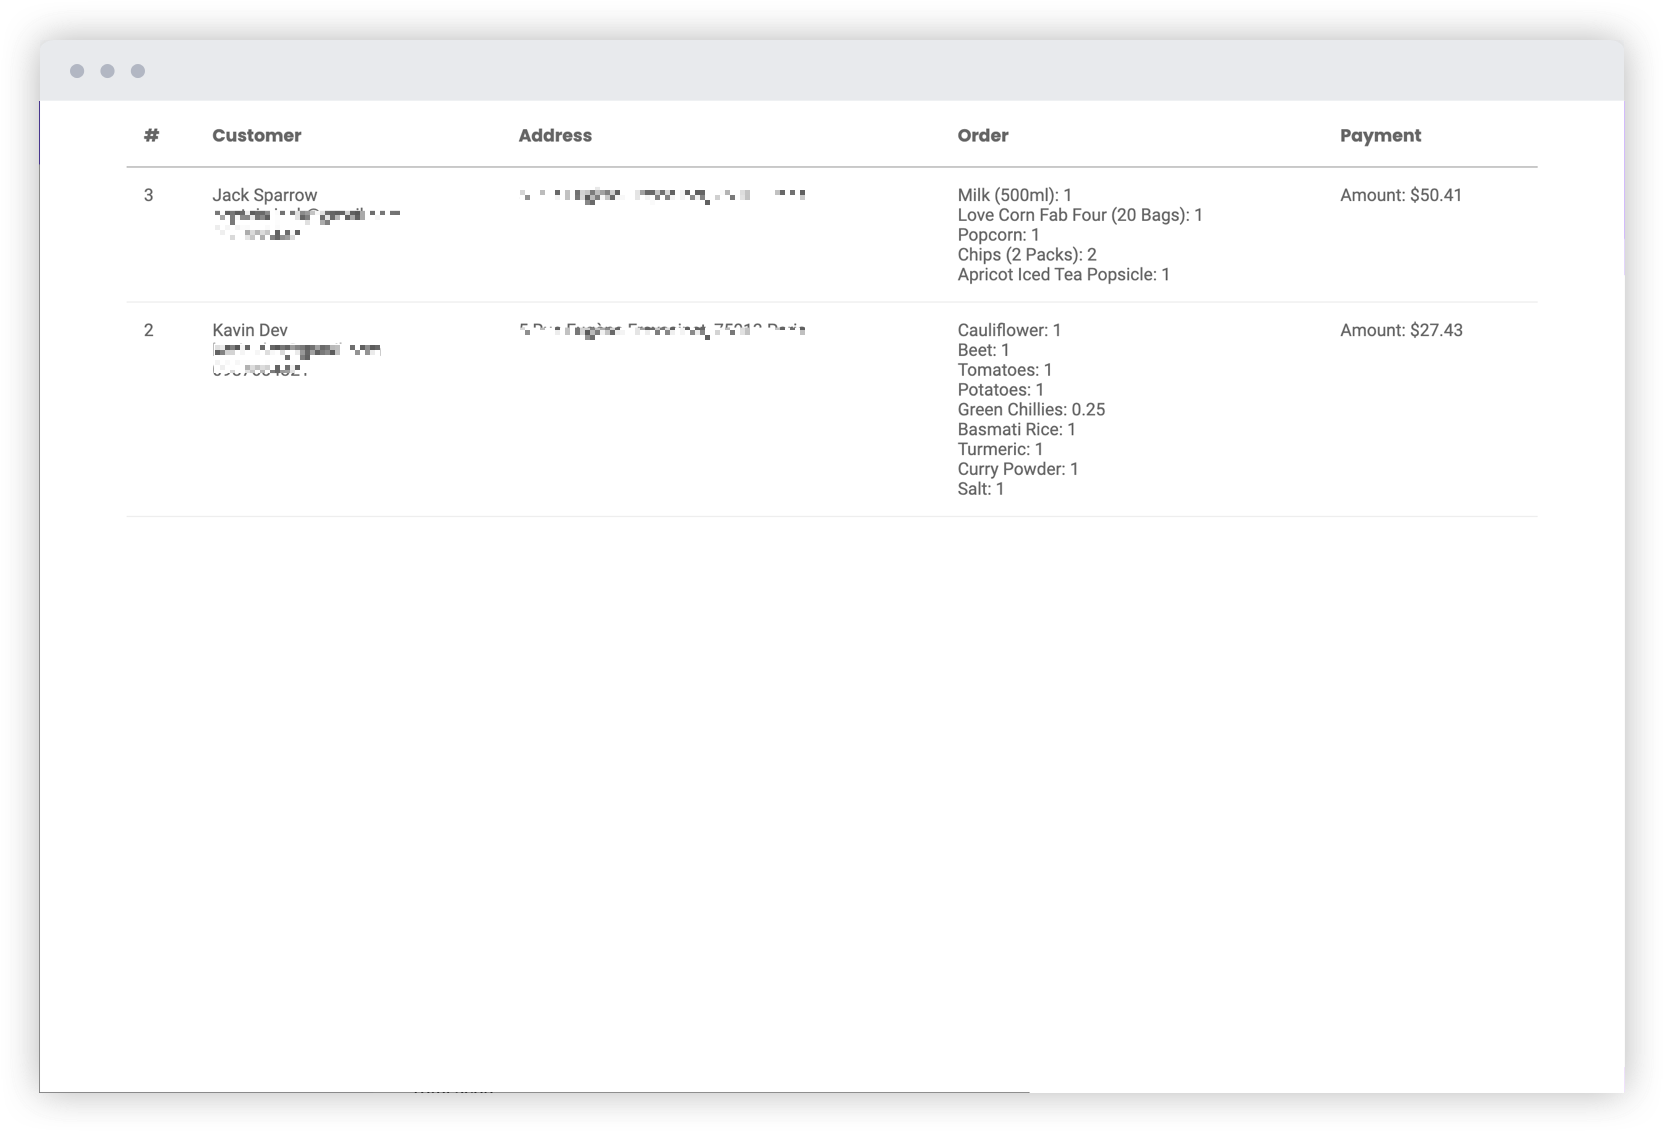 Apply filters to select specific orders and easily print pickup lists, packing lists to fulfill orders